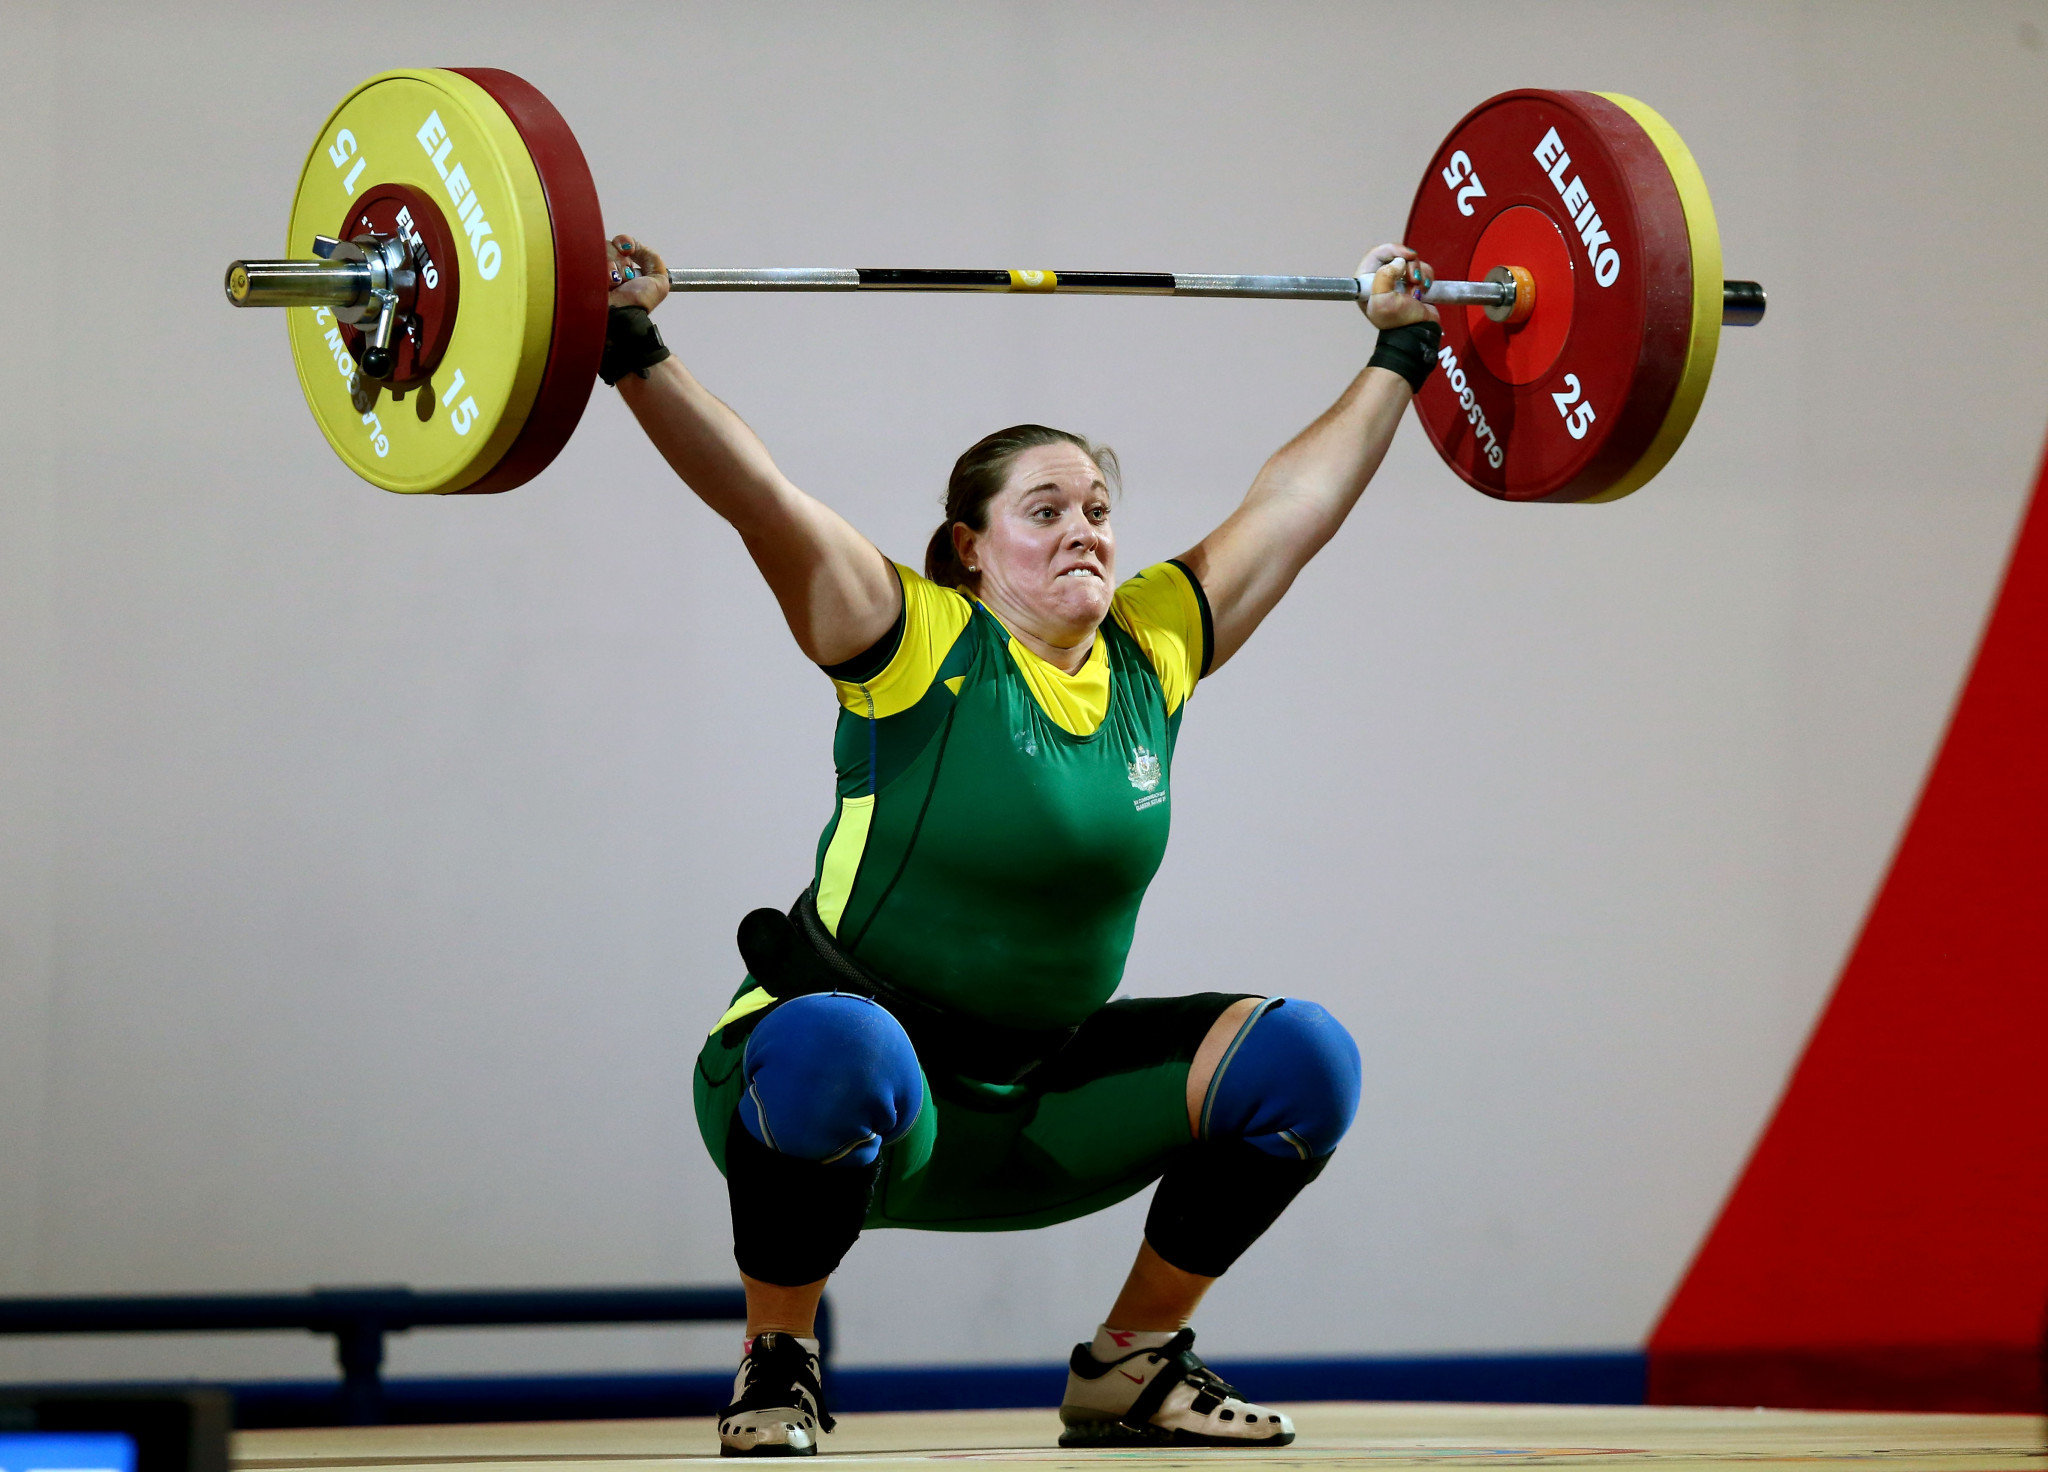 Melbourne 2006 gold medallist Deborah Acason is among the 16 Australian weightlifters selected to represent the host nation ©Getty Images